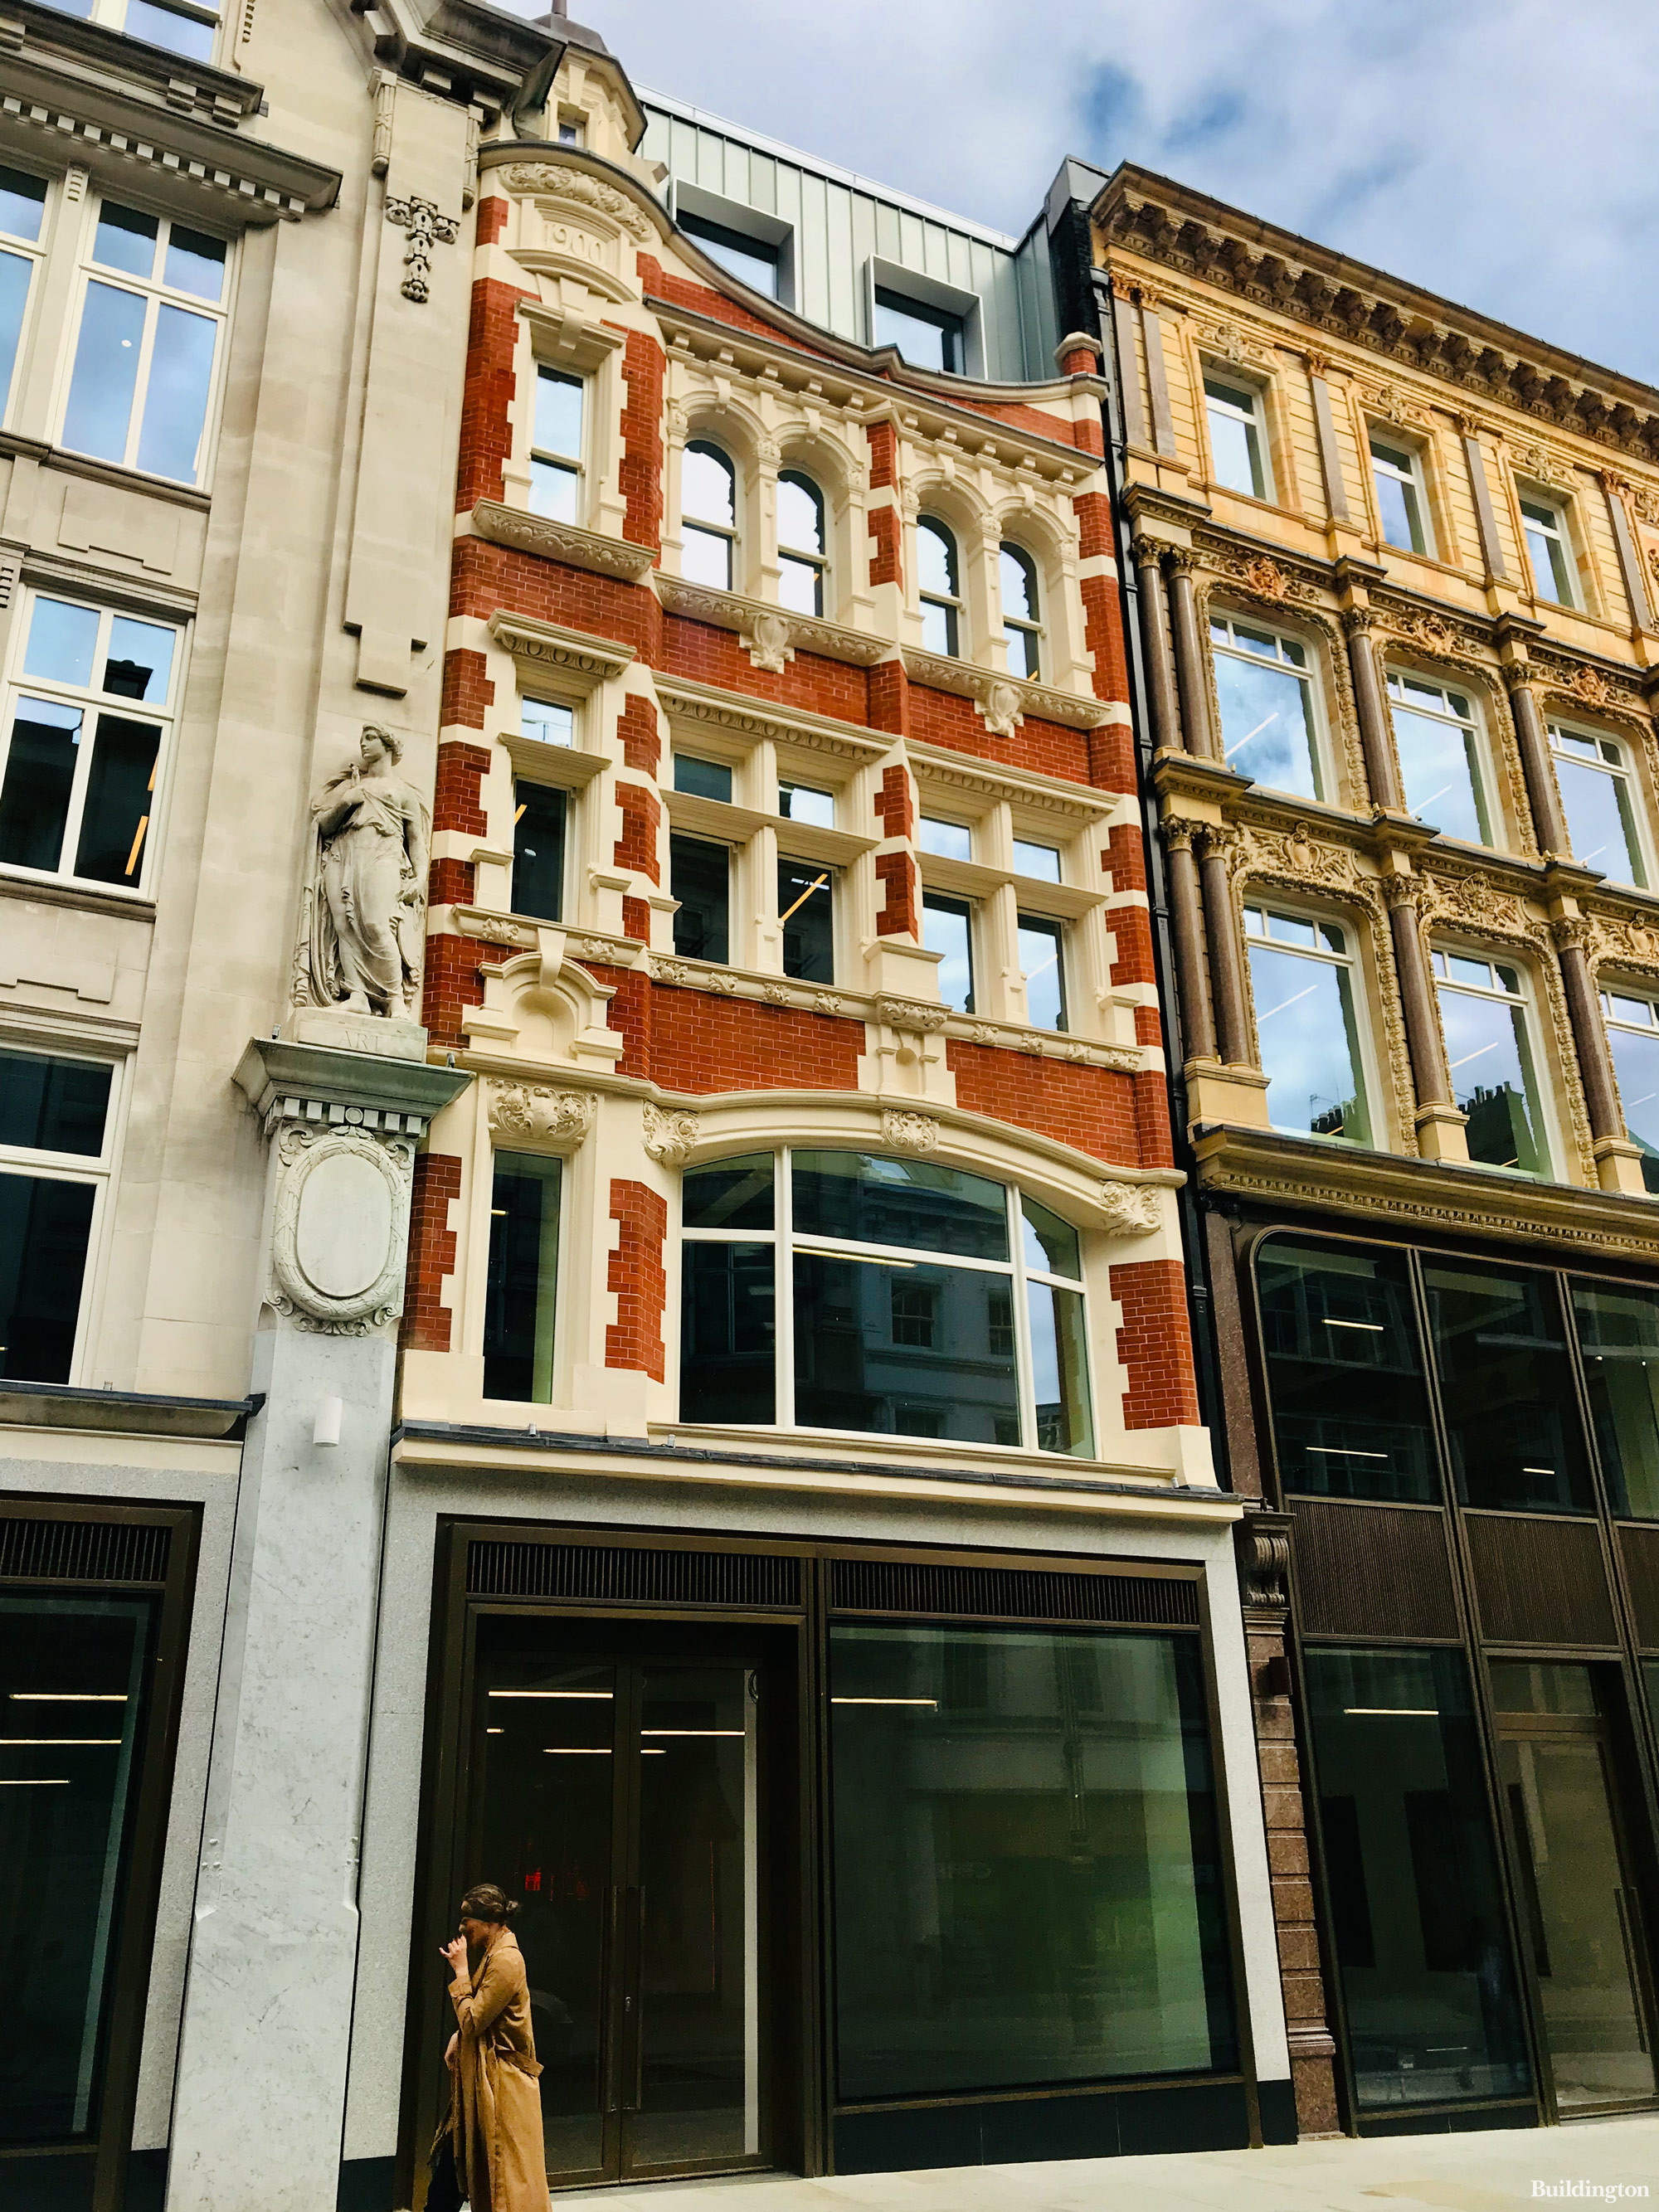 169 New Bond Street building with retail premises on the lower ground, ground and first floor.